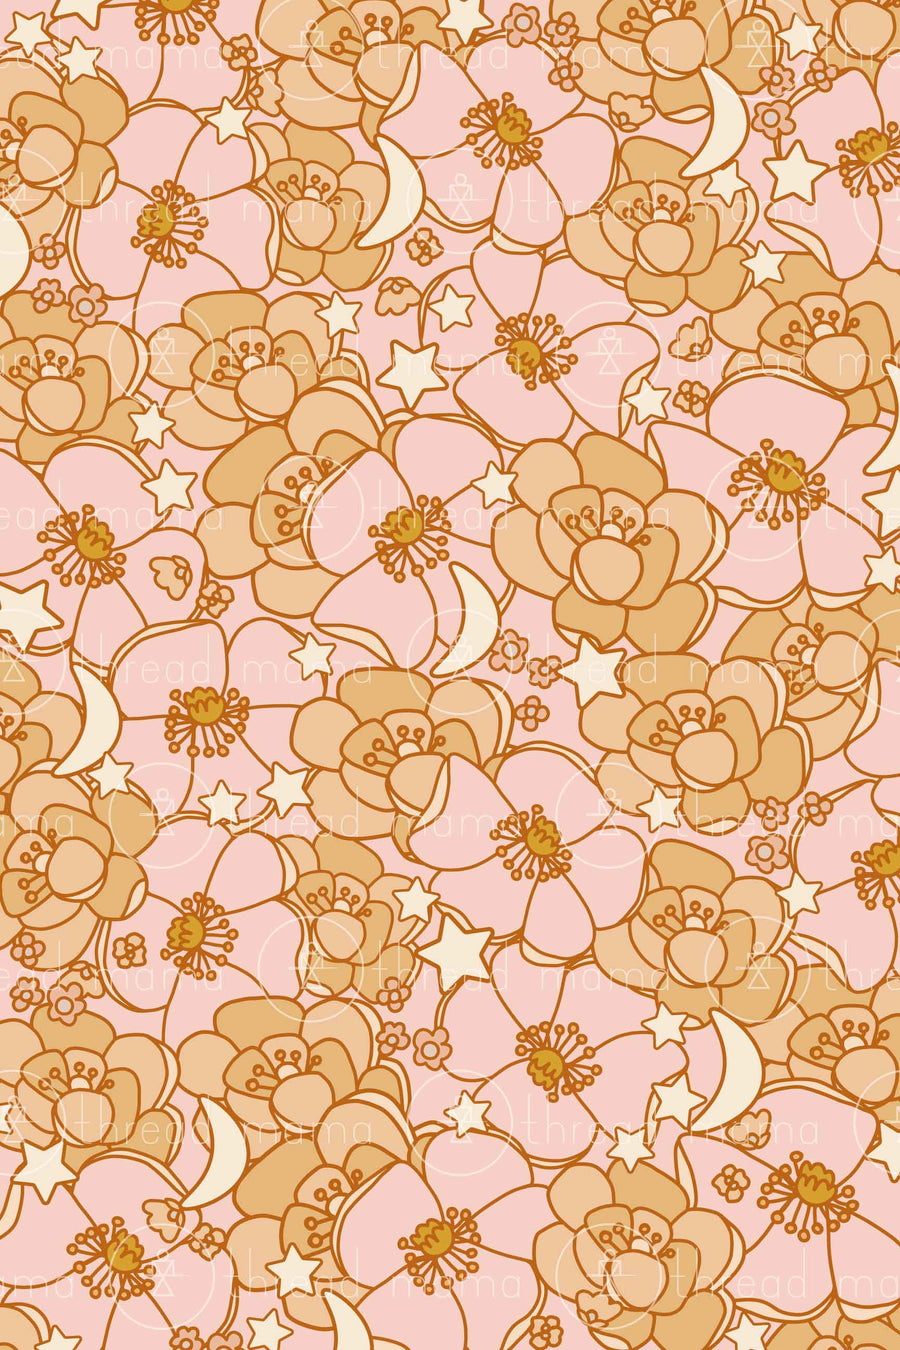 Fall Floral Background 3 (Printable Poster)